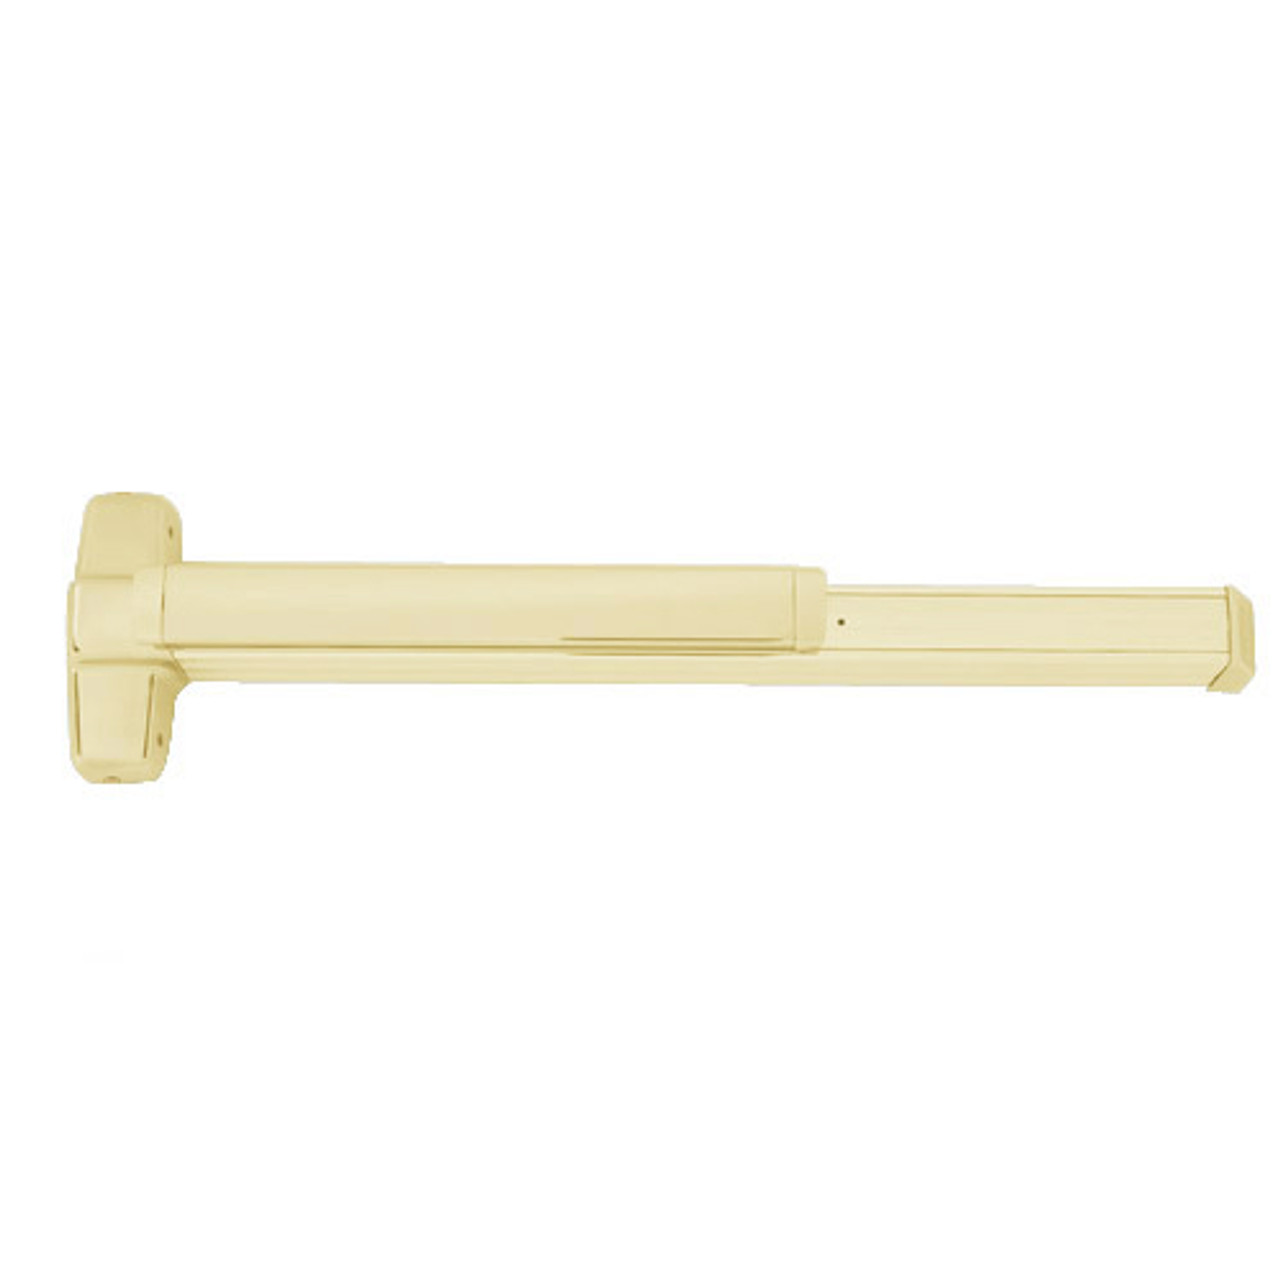 QEL9847WDC-EO-US4-4 Von Duprin Exit Device with Quiet Electric Latch in Satin Brass